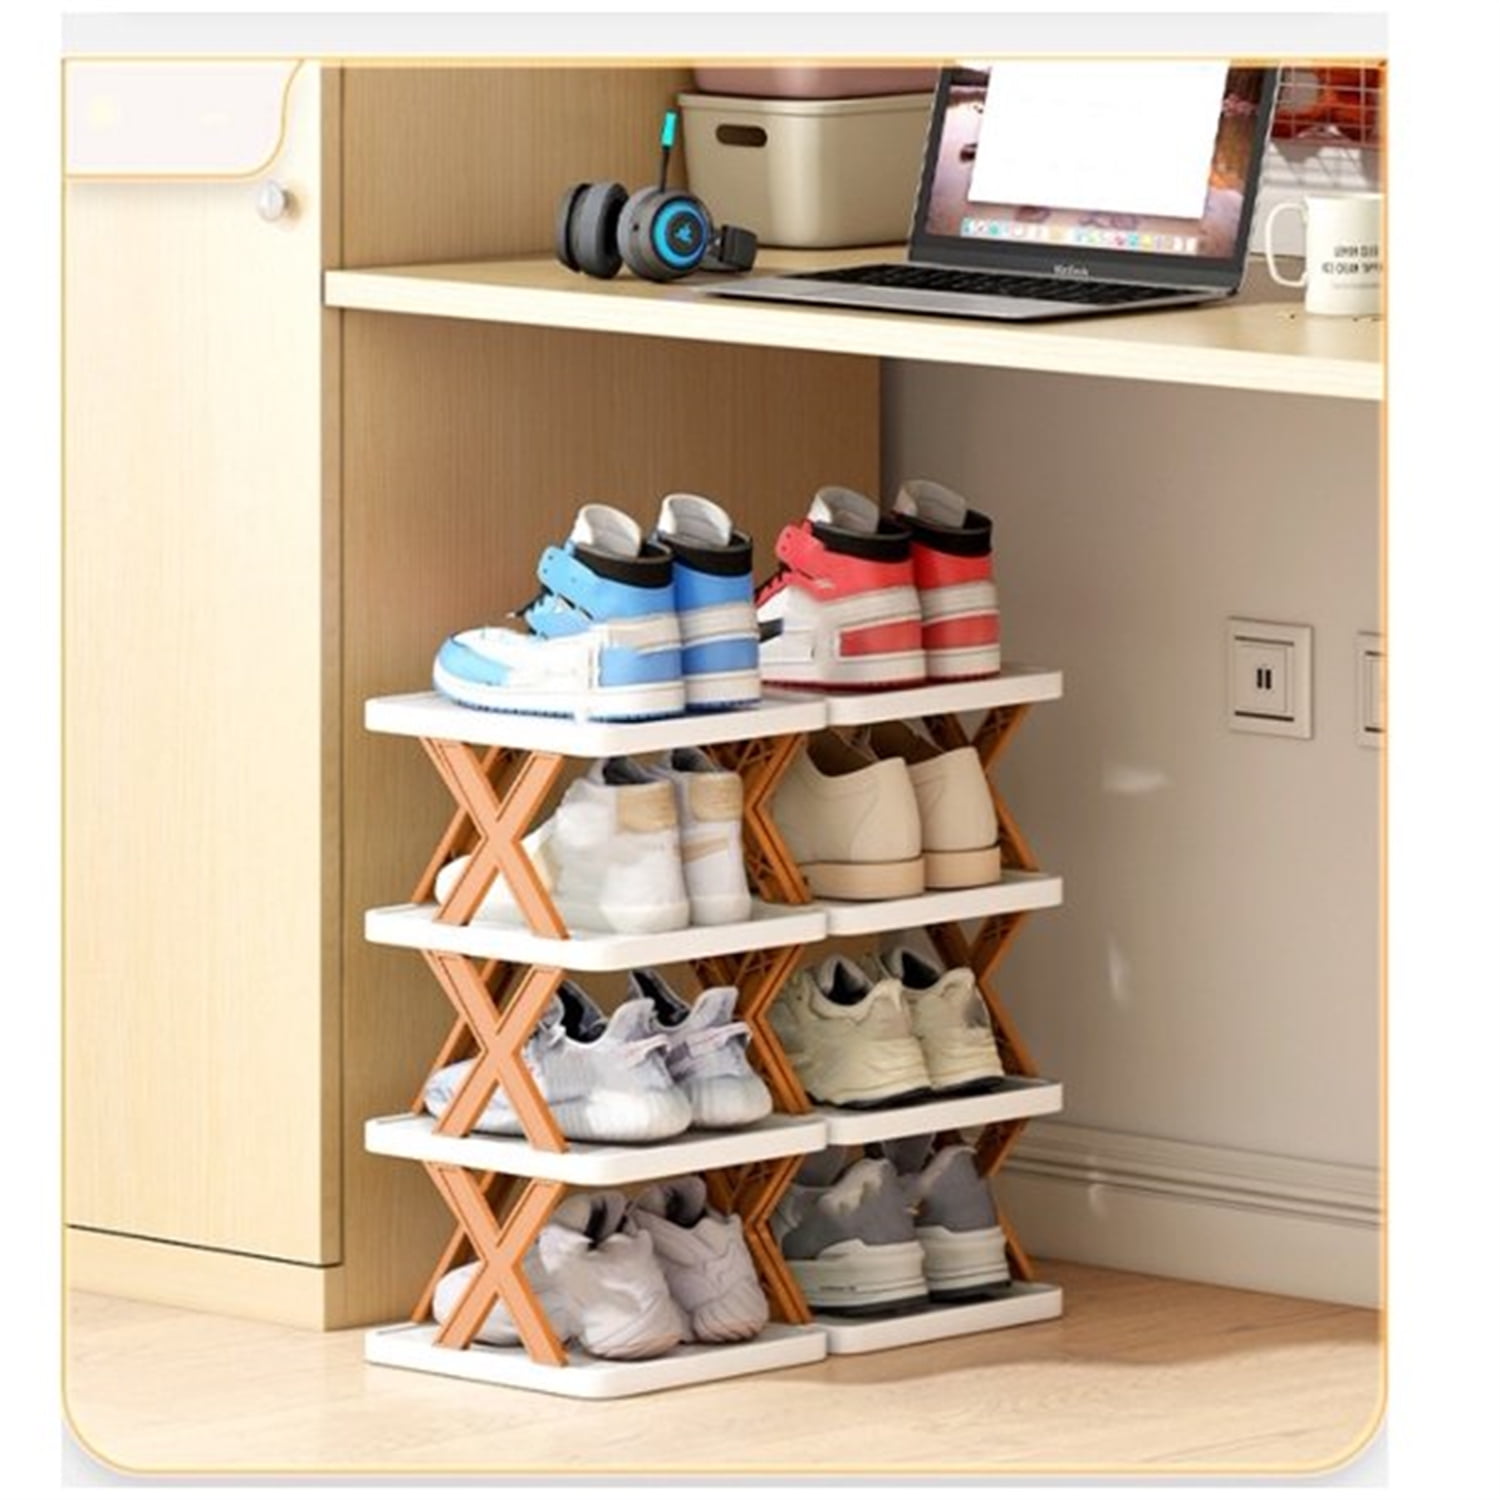 Dropship 8-Tier 2-Row Shoe Rack Organizer Stackable Free Standing Shoe  Storage Shelf Plastic Shoe Cabinet Tower With Transparent Doors For Heels  Boots Slippers Entryway Hallway Bedroom to Sell Online at a Lower